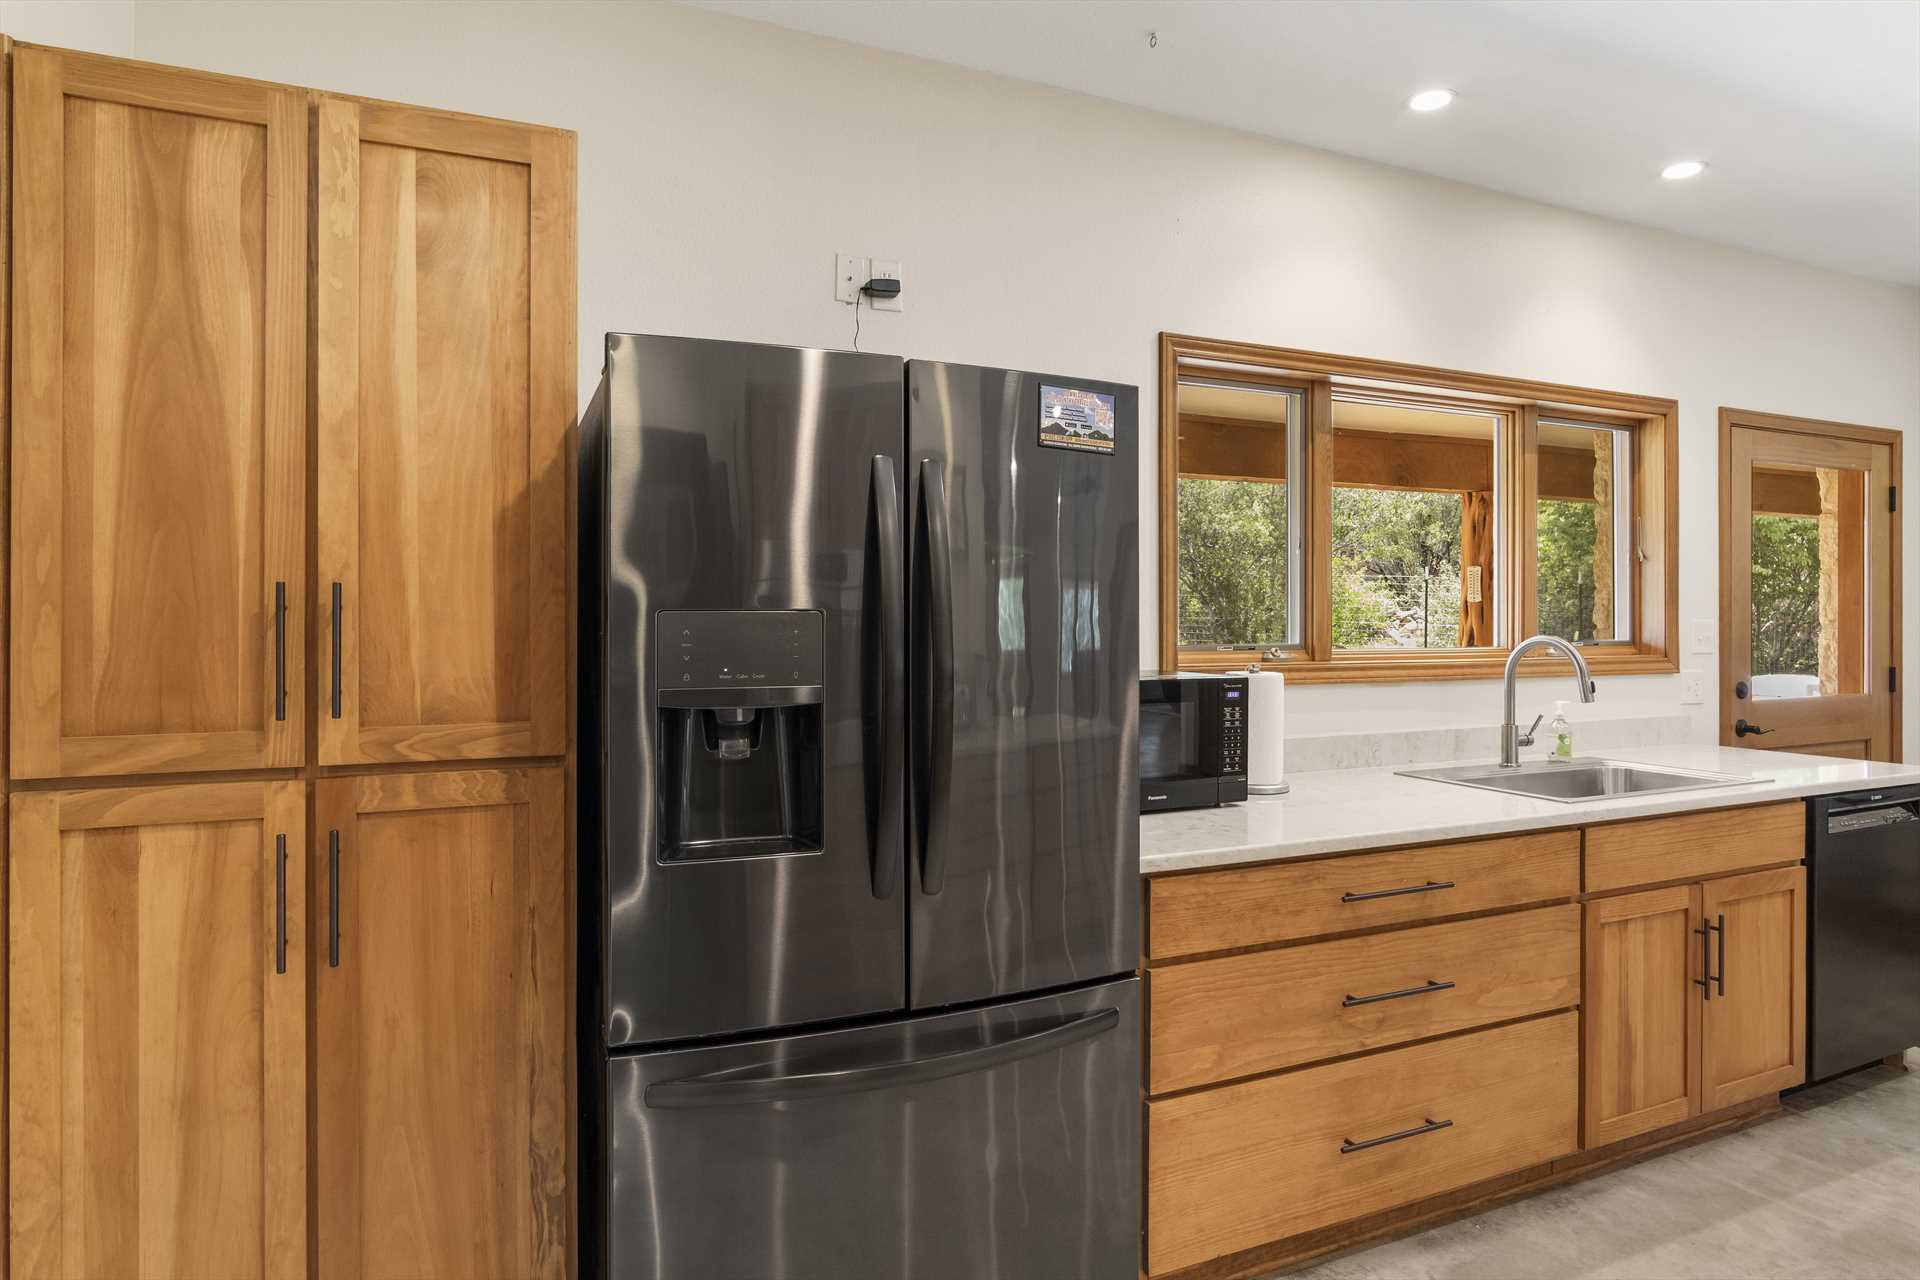                                                 The kitchen, as well as the rest of the house at Roadrunner Canyon Ranch, is completely compliant with ADA accessibility standards.